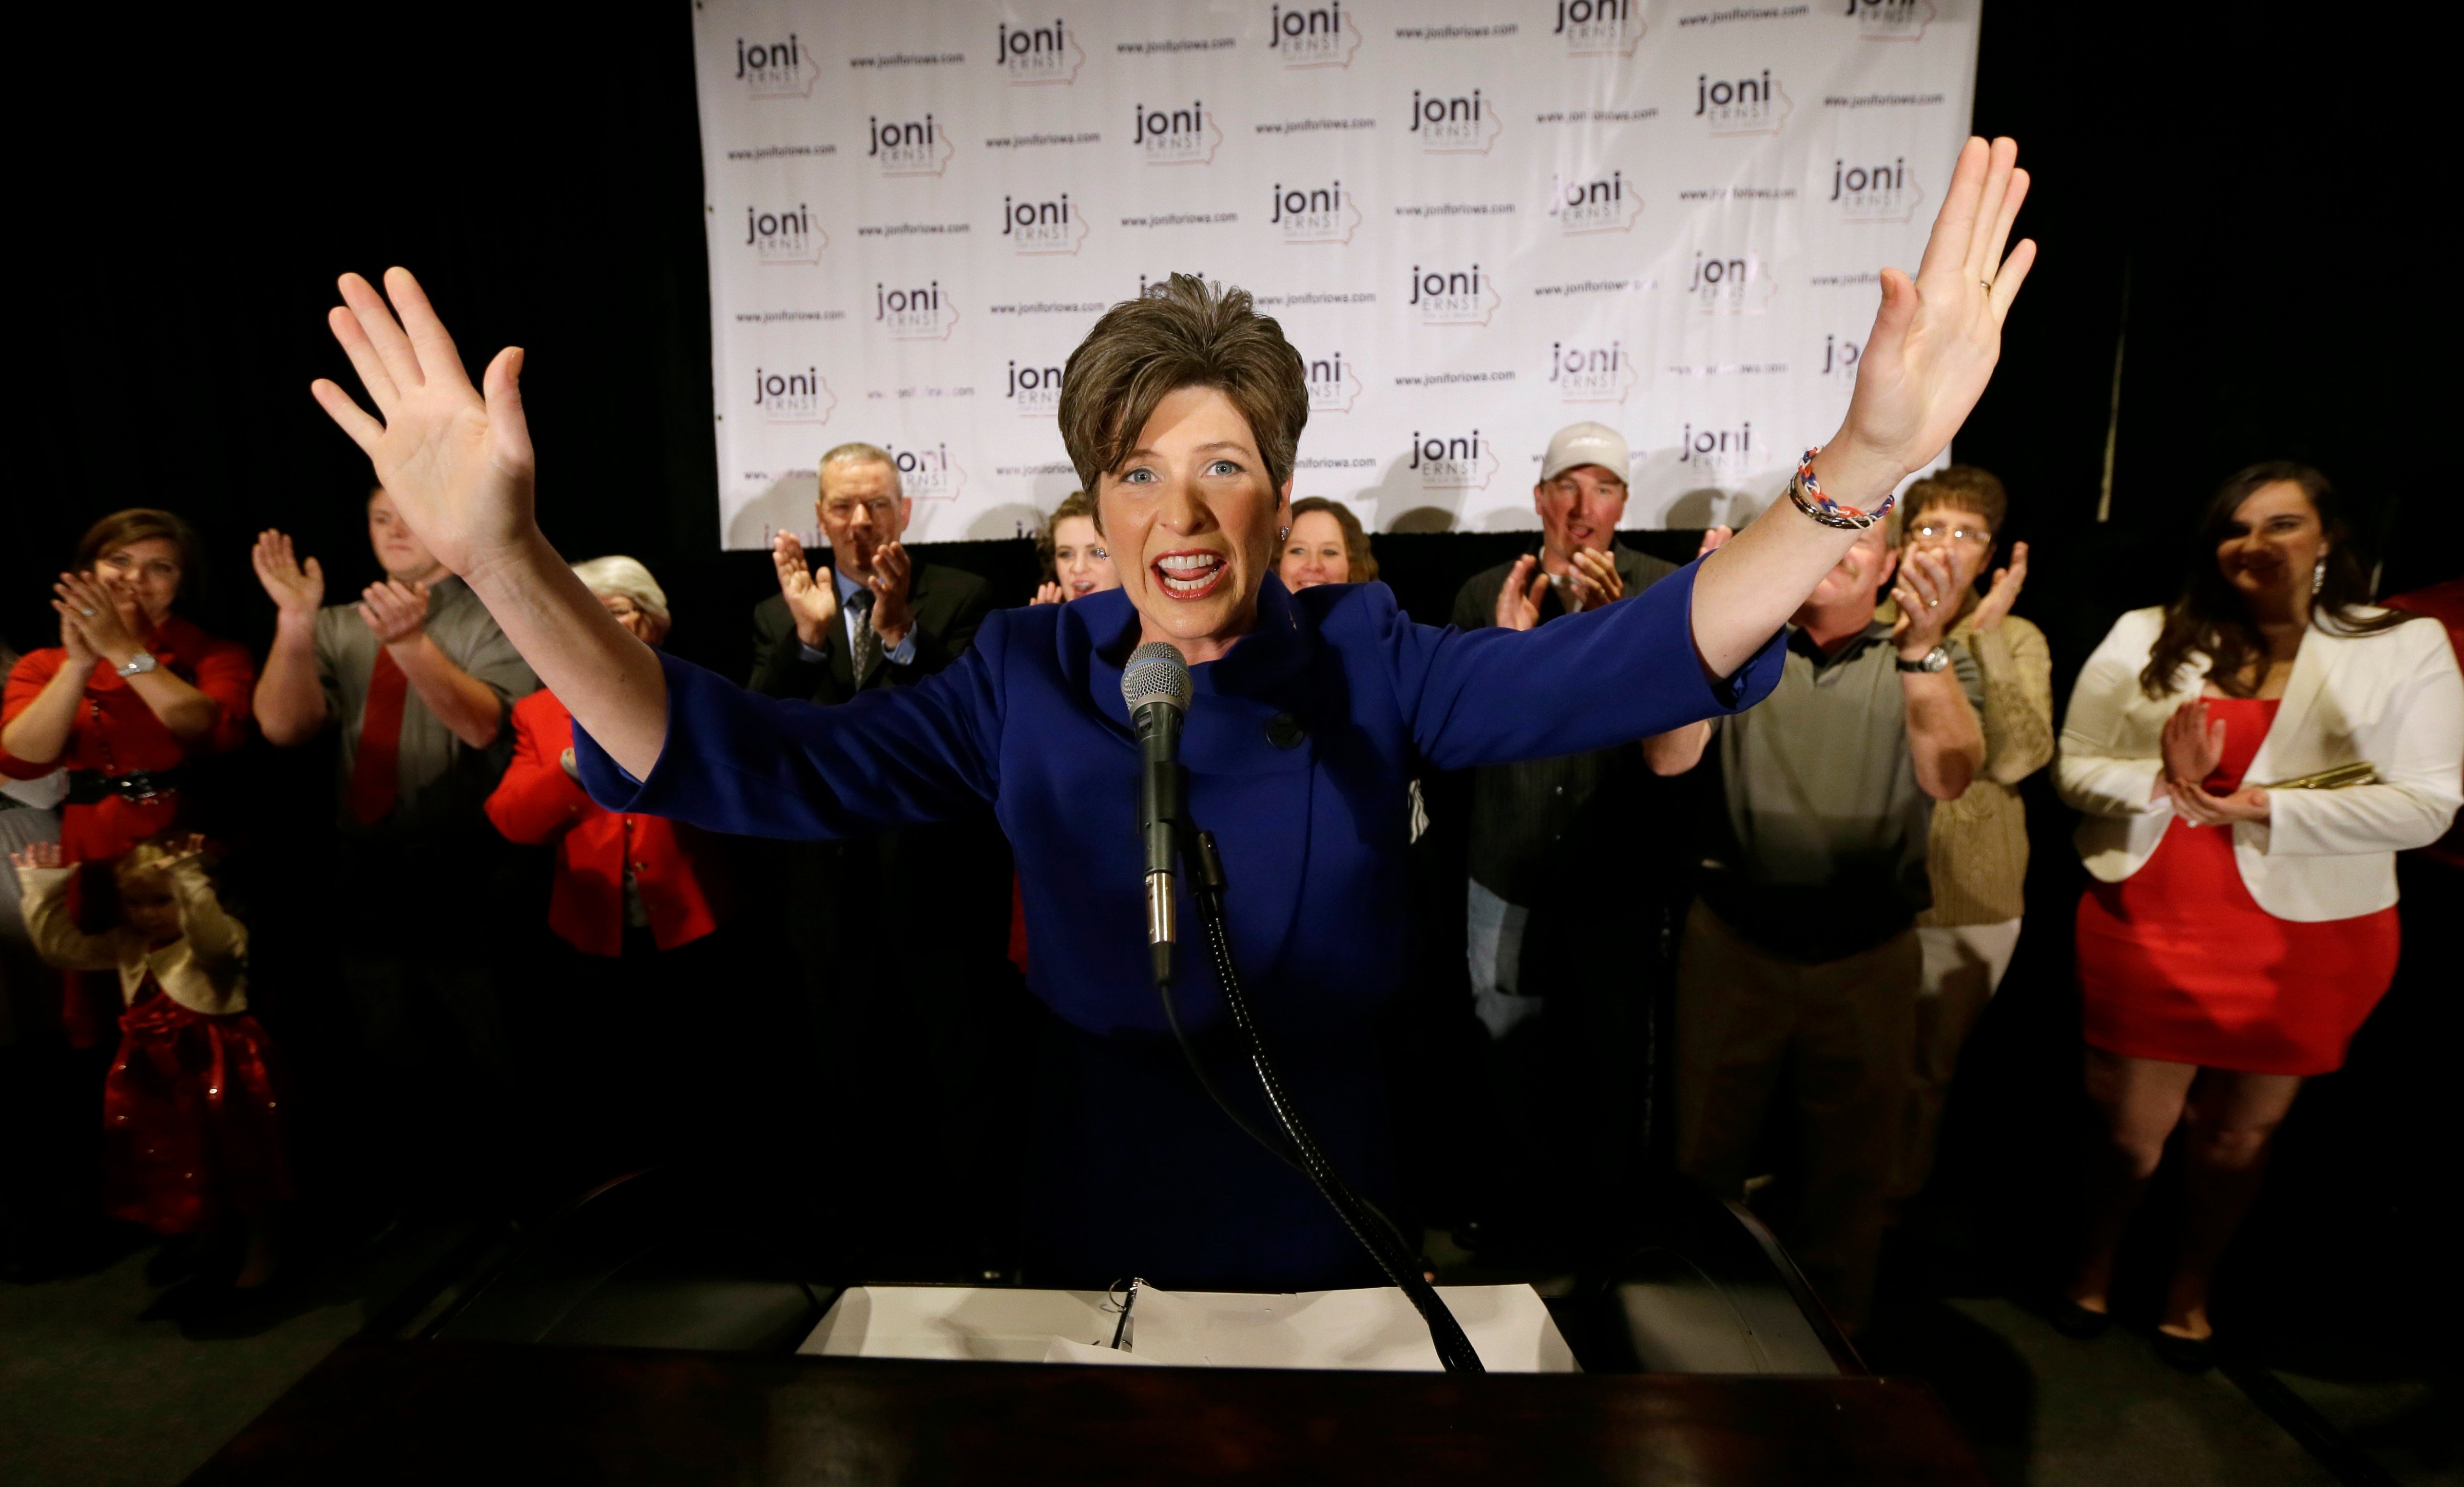 U.S. Sen.-elect Joni Ernst speaks to supporters during an election night rally on Nov. 4, 2014, in West Des Moines, Iowa. Ernst defeated U.S. Rep. Bruce Braley, D-Iowa, in the race to replace retiring U.S. Sen. Tom Harkin.